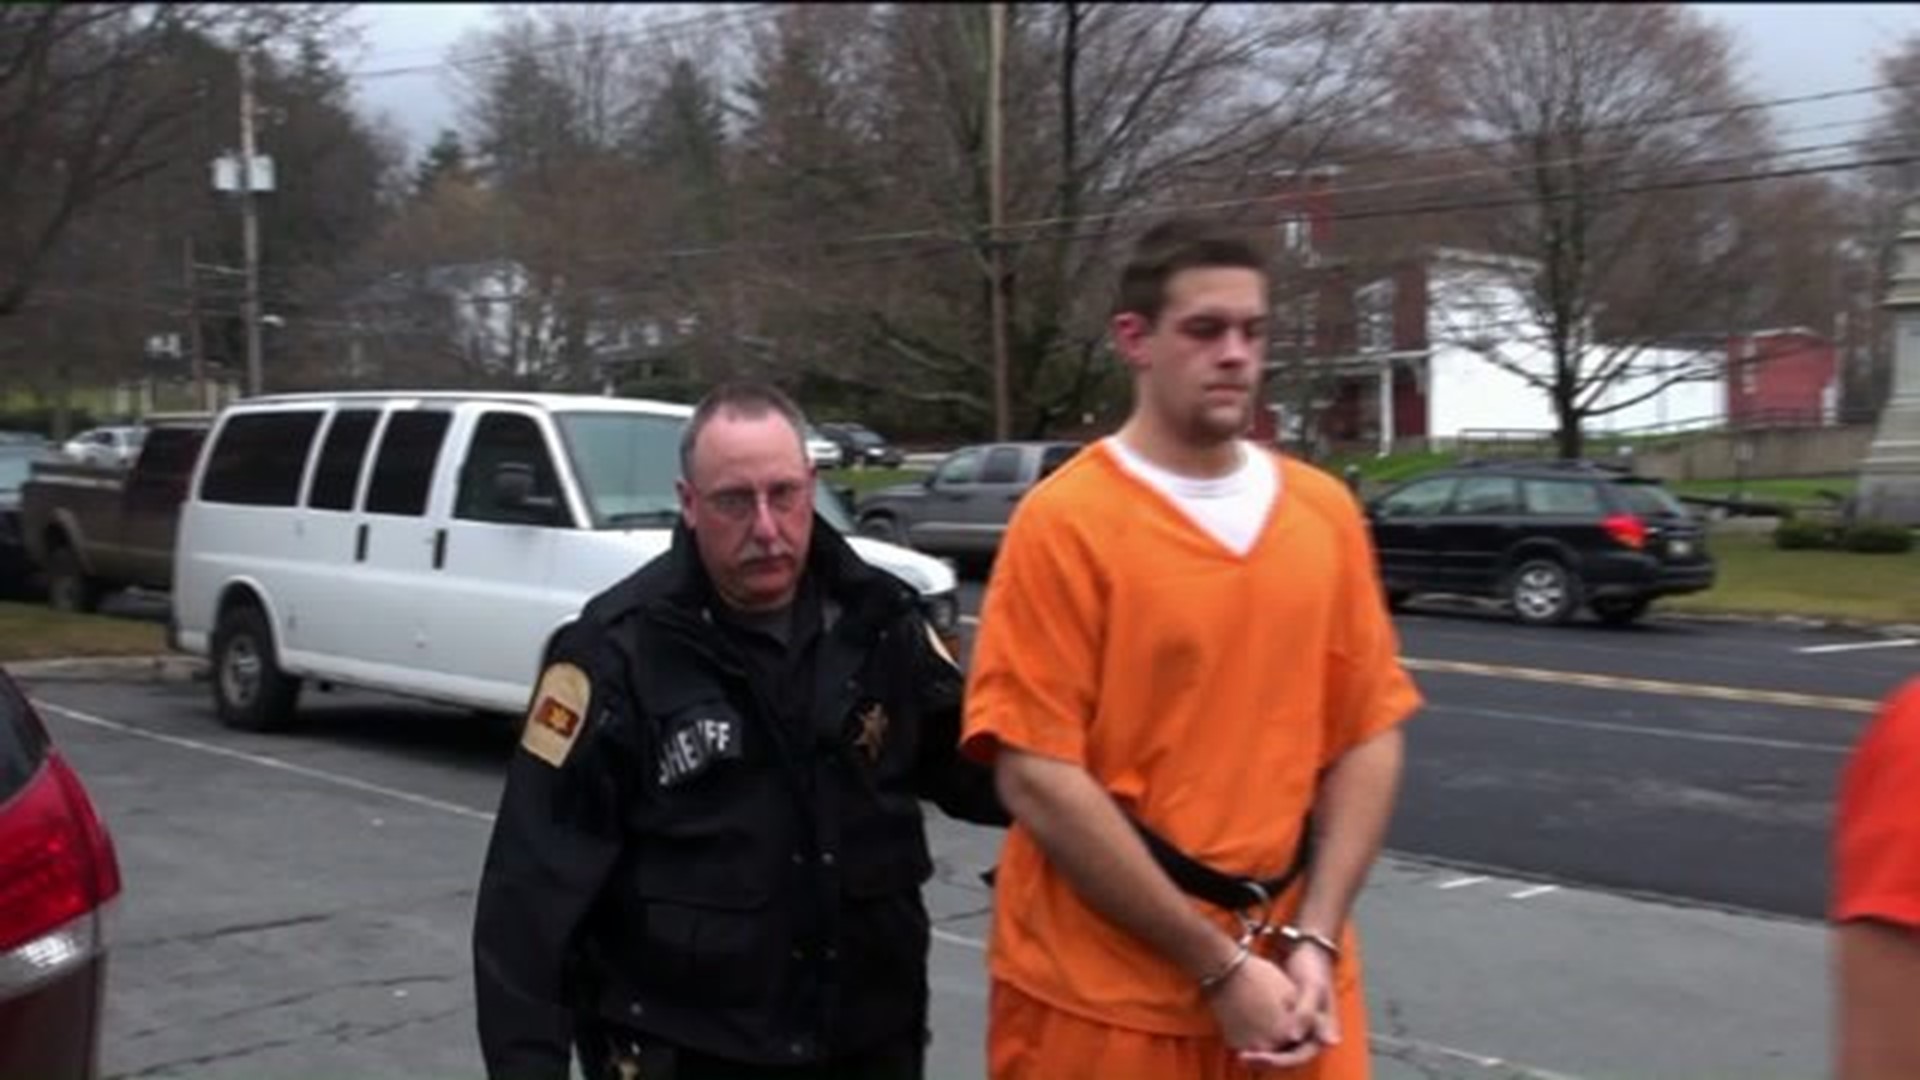 Prison Term for Stabbing Death in Susquehanna County